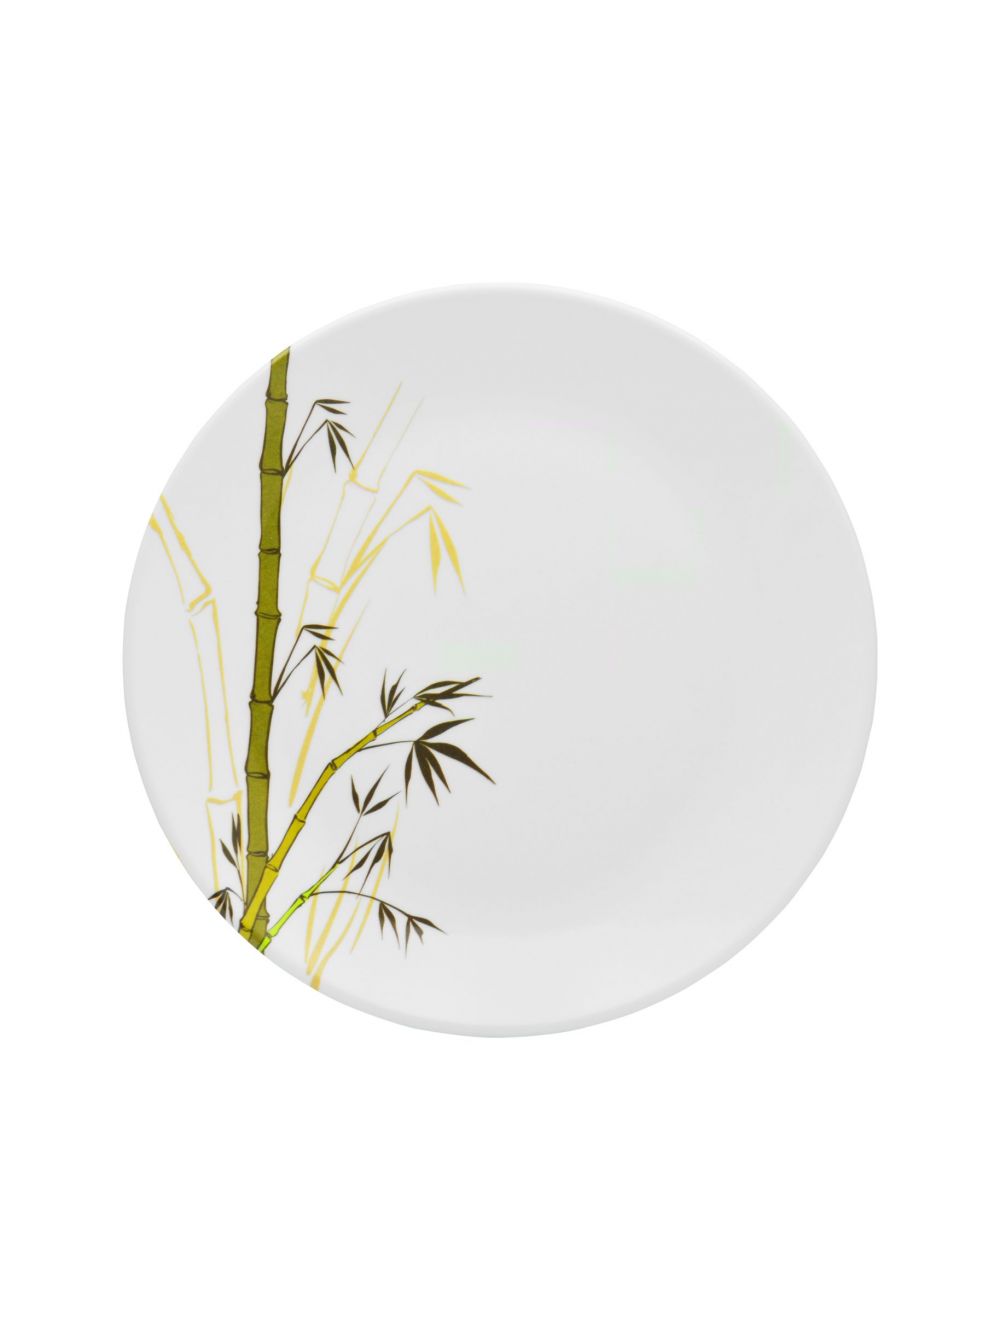 Dinewell Melamine Dinner Plate Green Bamboo-DWHP3089GB